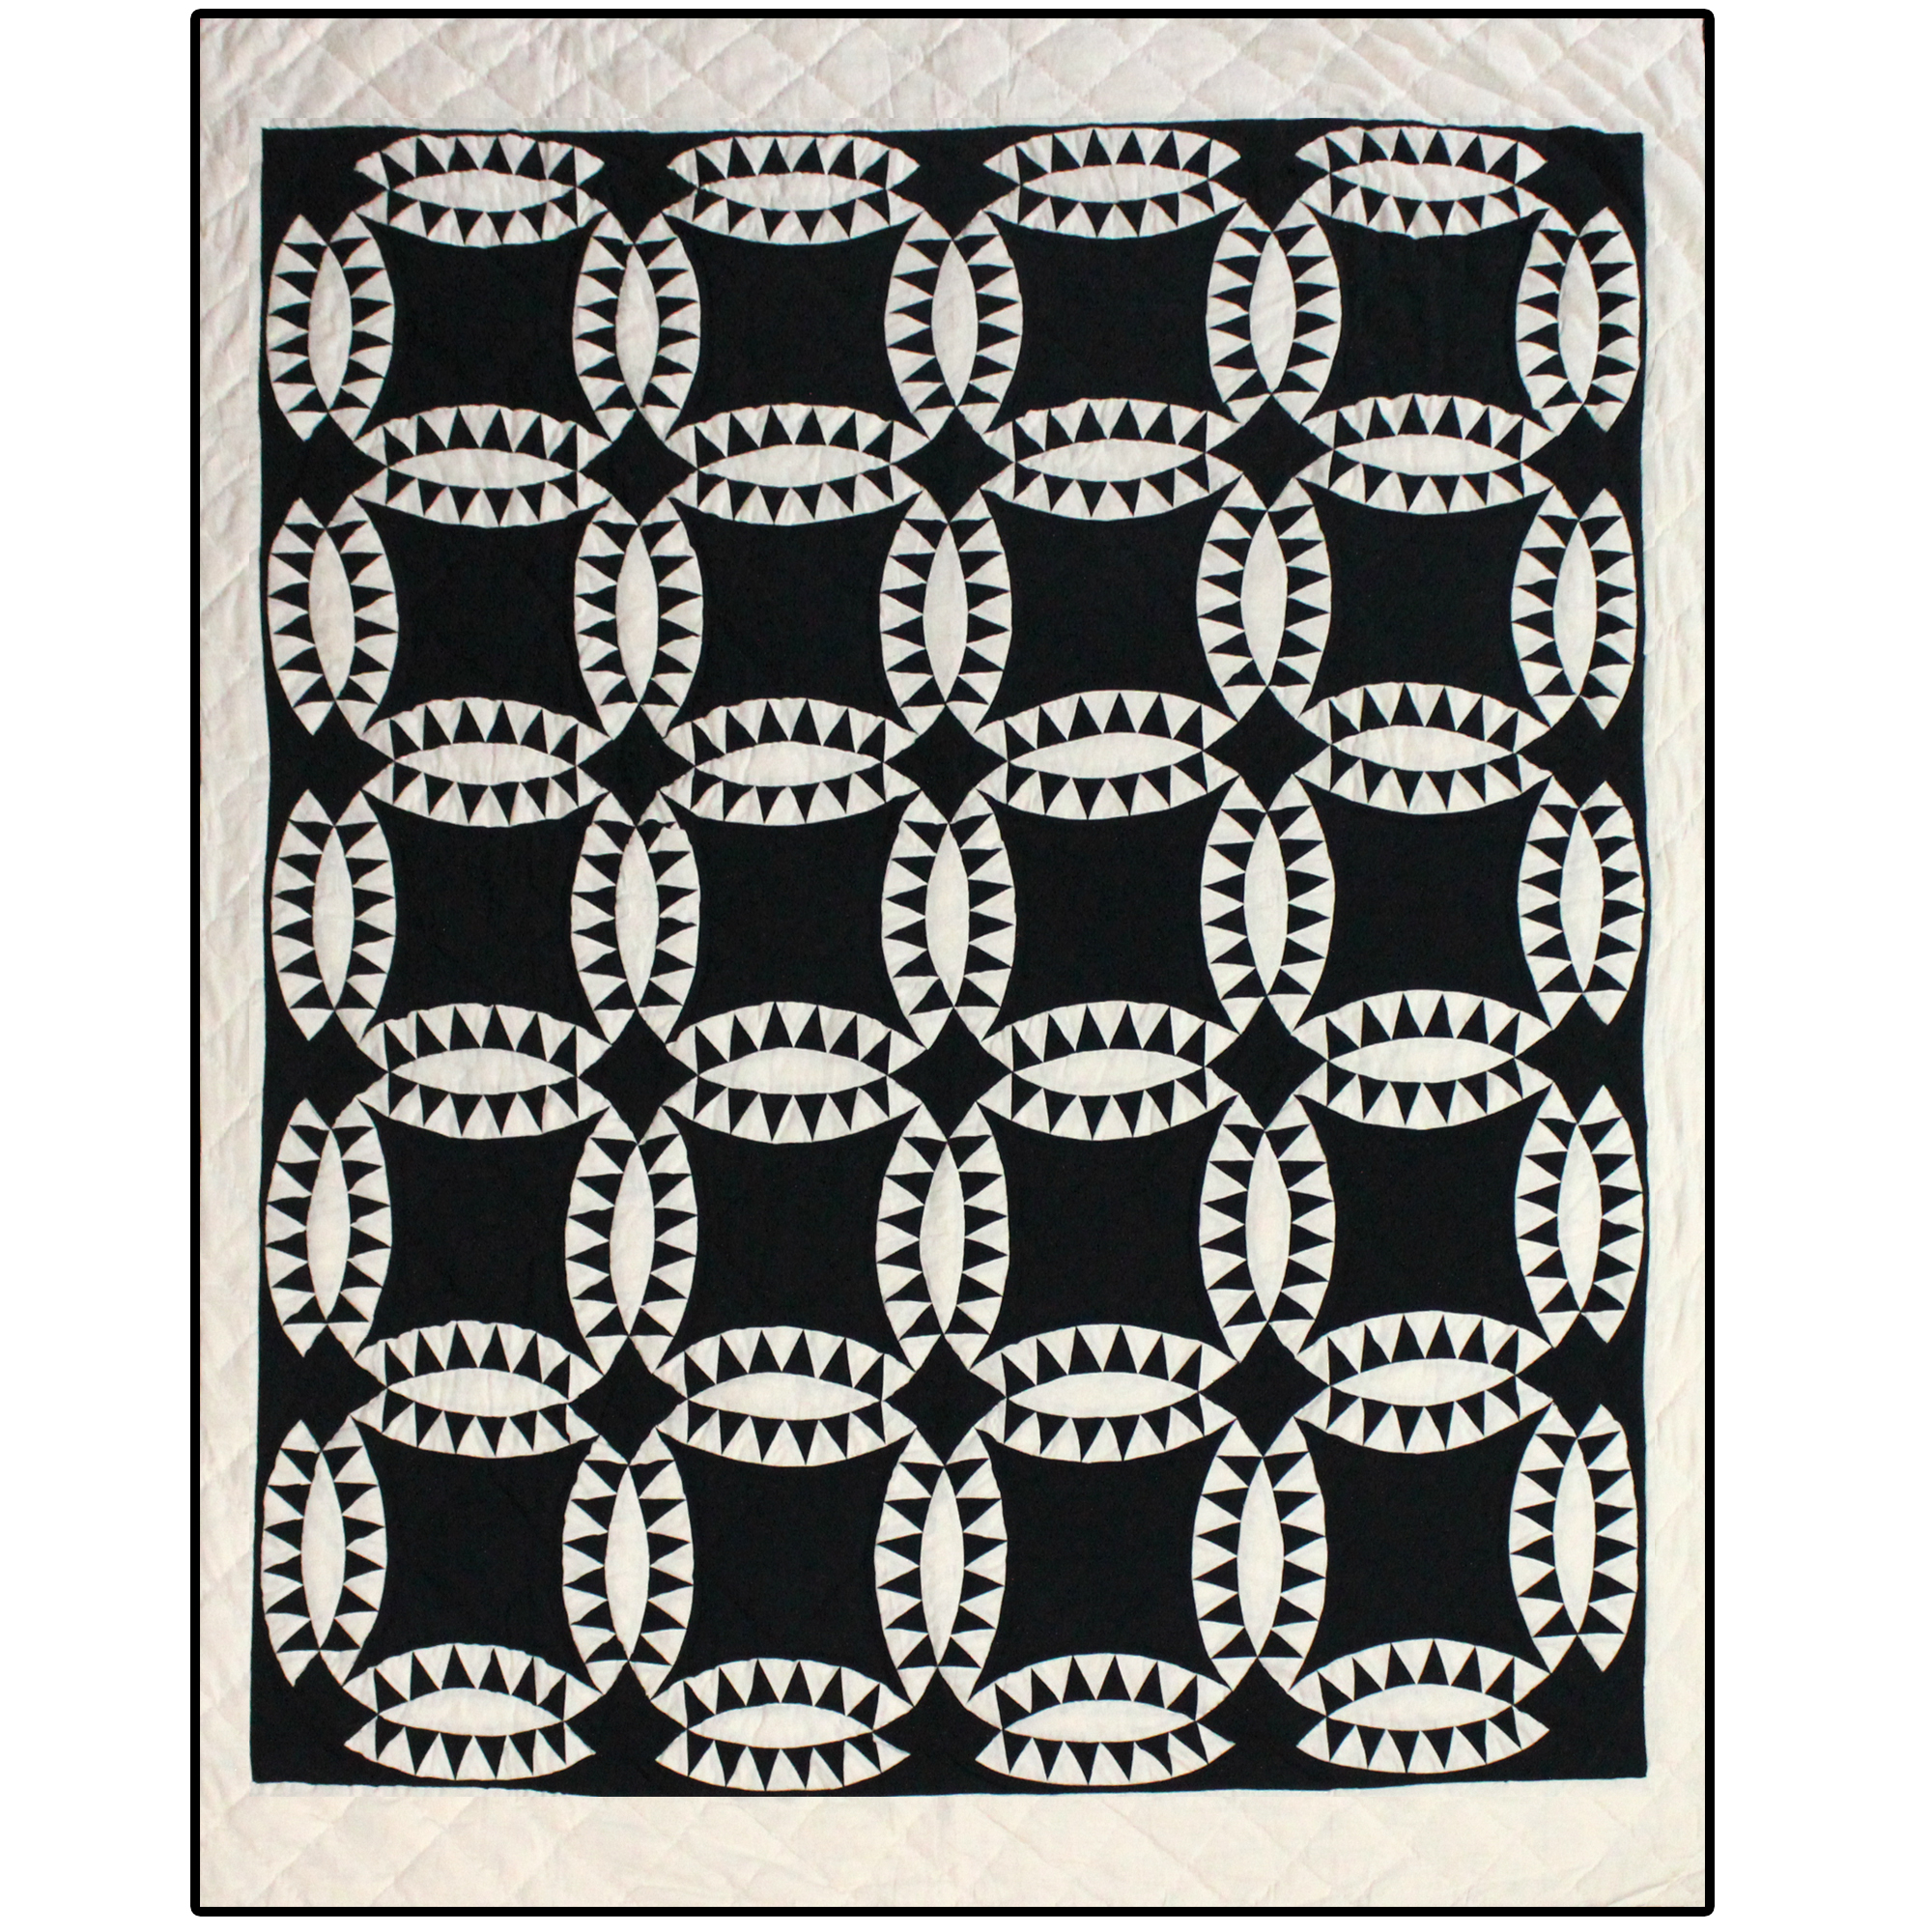 Black and white Wedding Ring King Quilt 105"W x 95"L